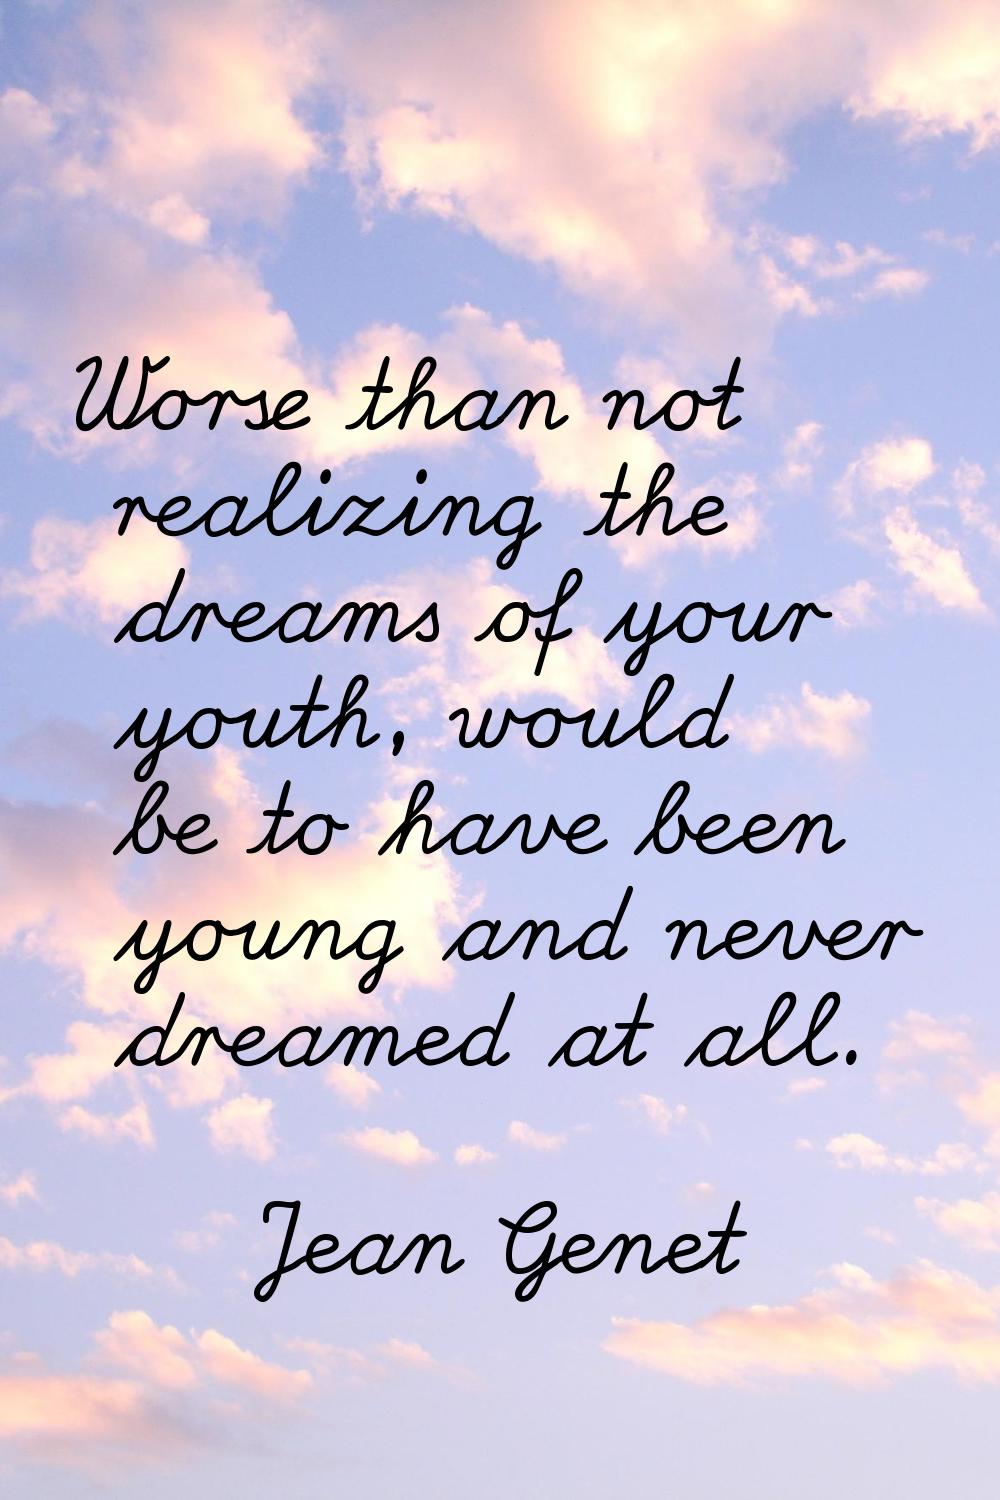 Worse than not realizing the dreams of your youth, would be to have been young and never dreamed at